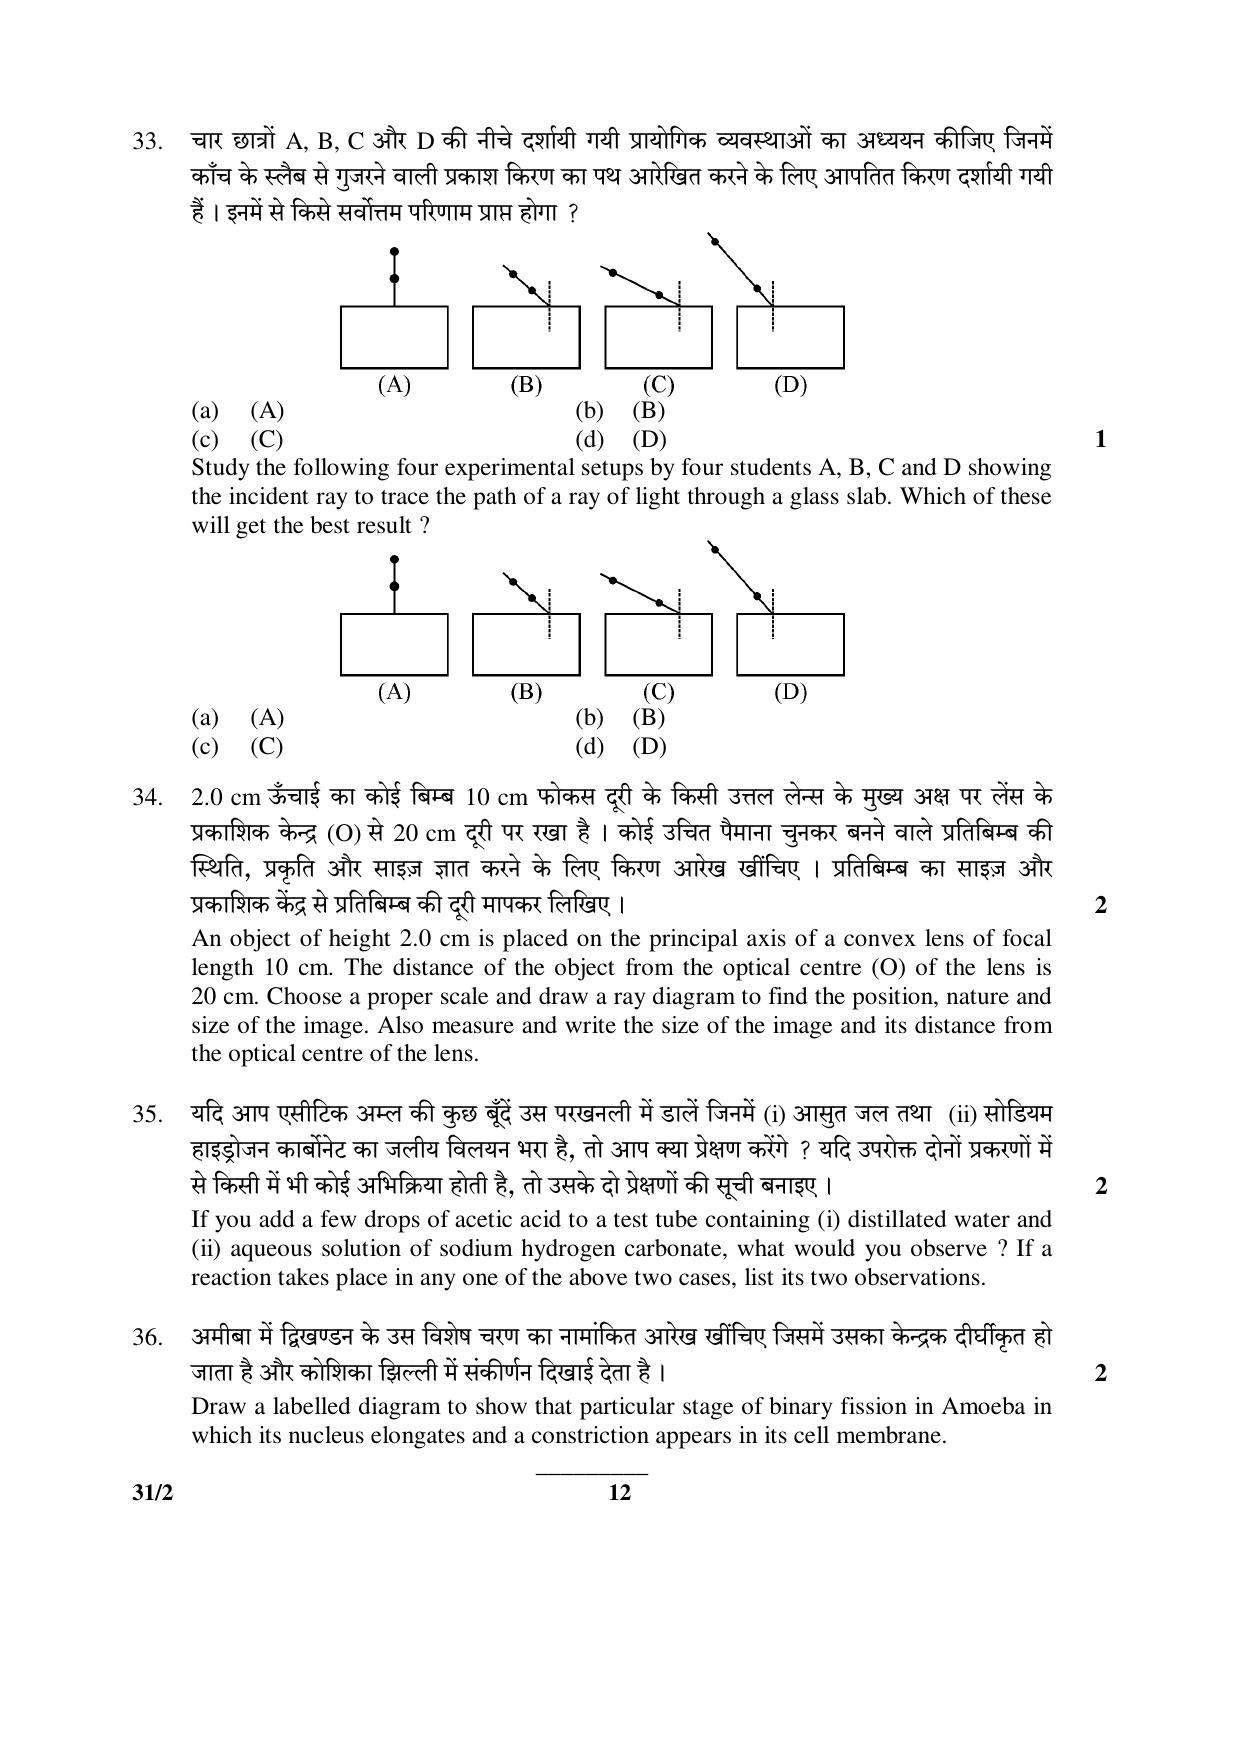 CBSE Class 10 31-2 (Science) 2017-comptt Question Paper - Page 12